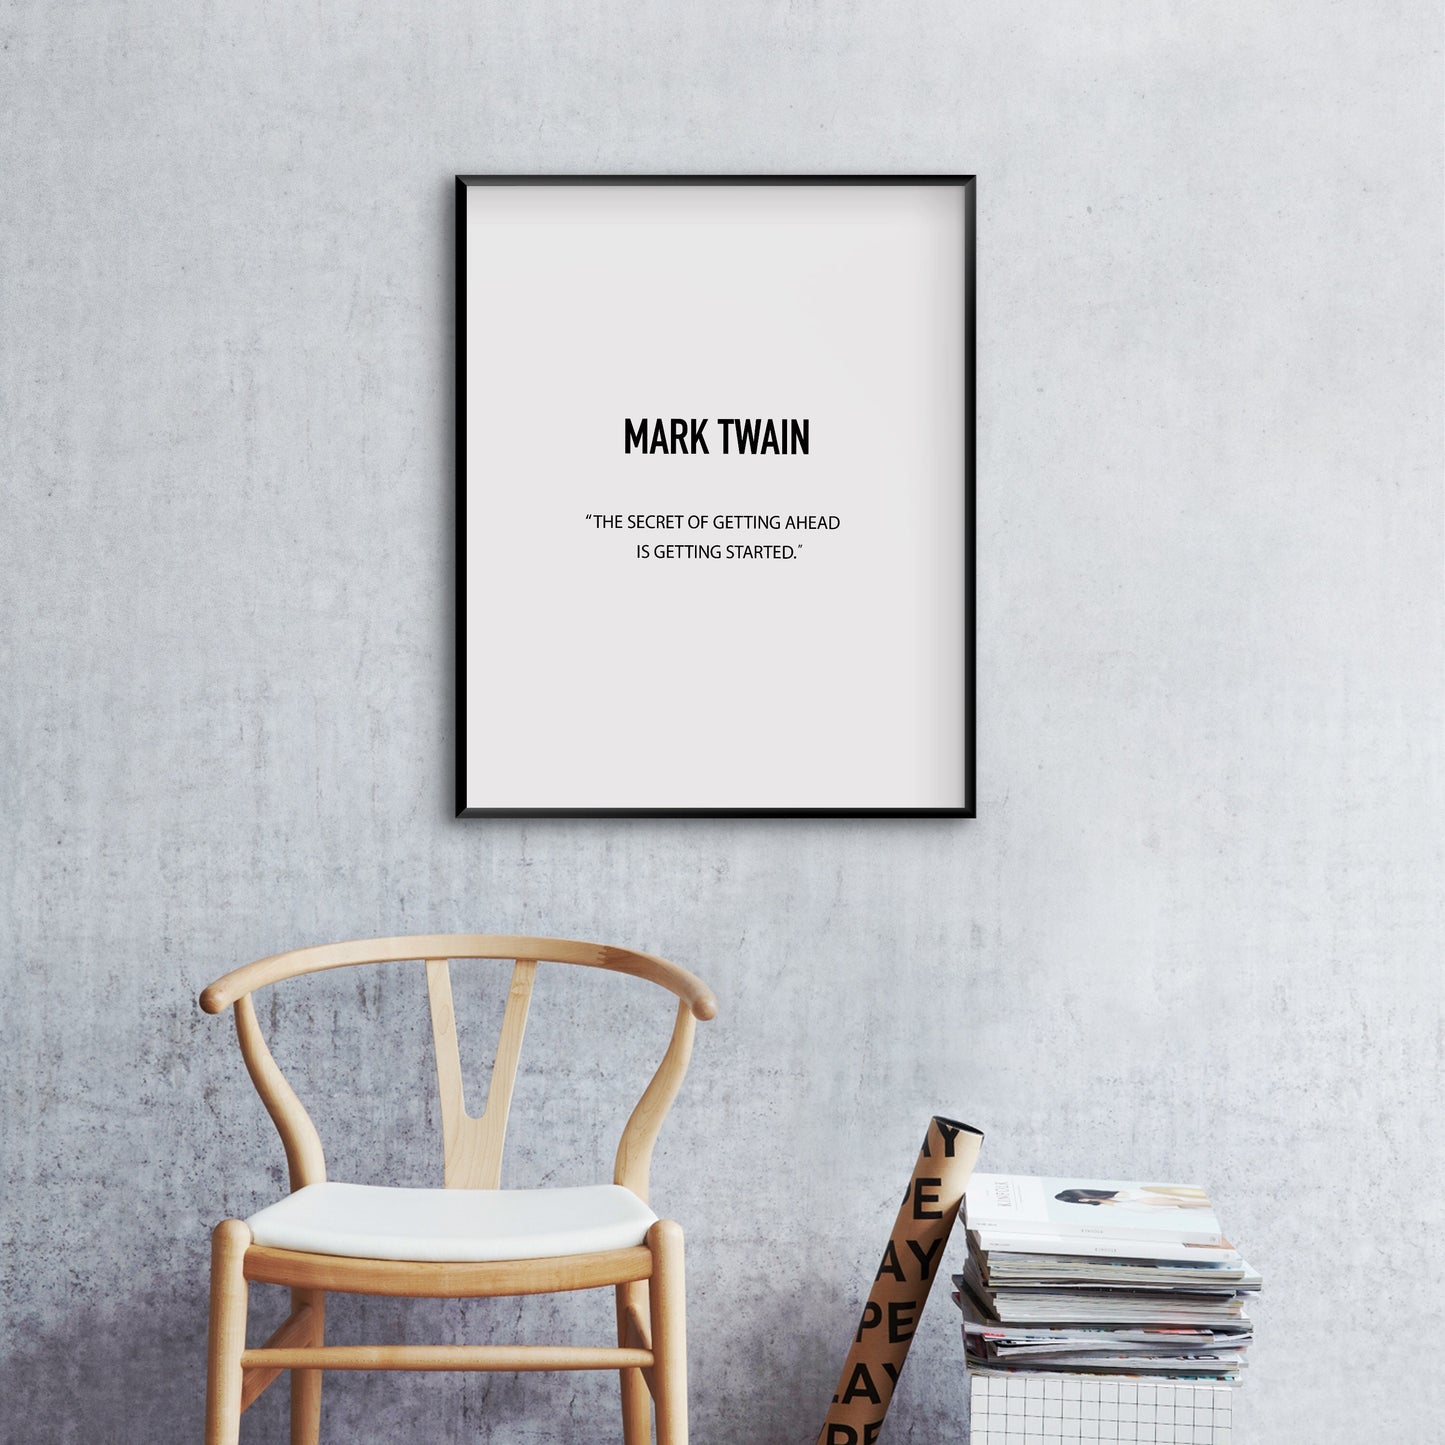 The secret of getting ahead is getting started,Mark Twain quote,Mark Twain print,Inspirational print,Motivational quote,Office print